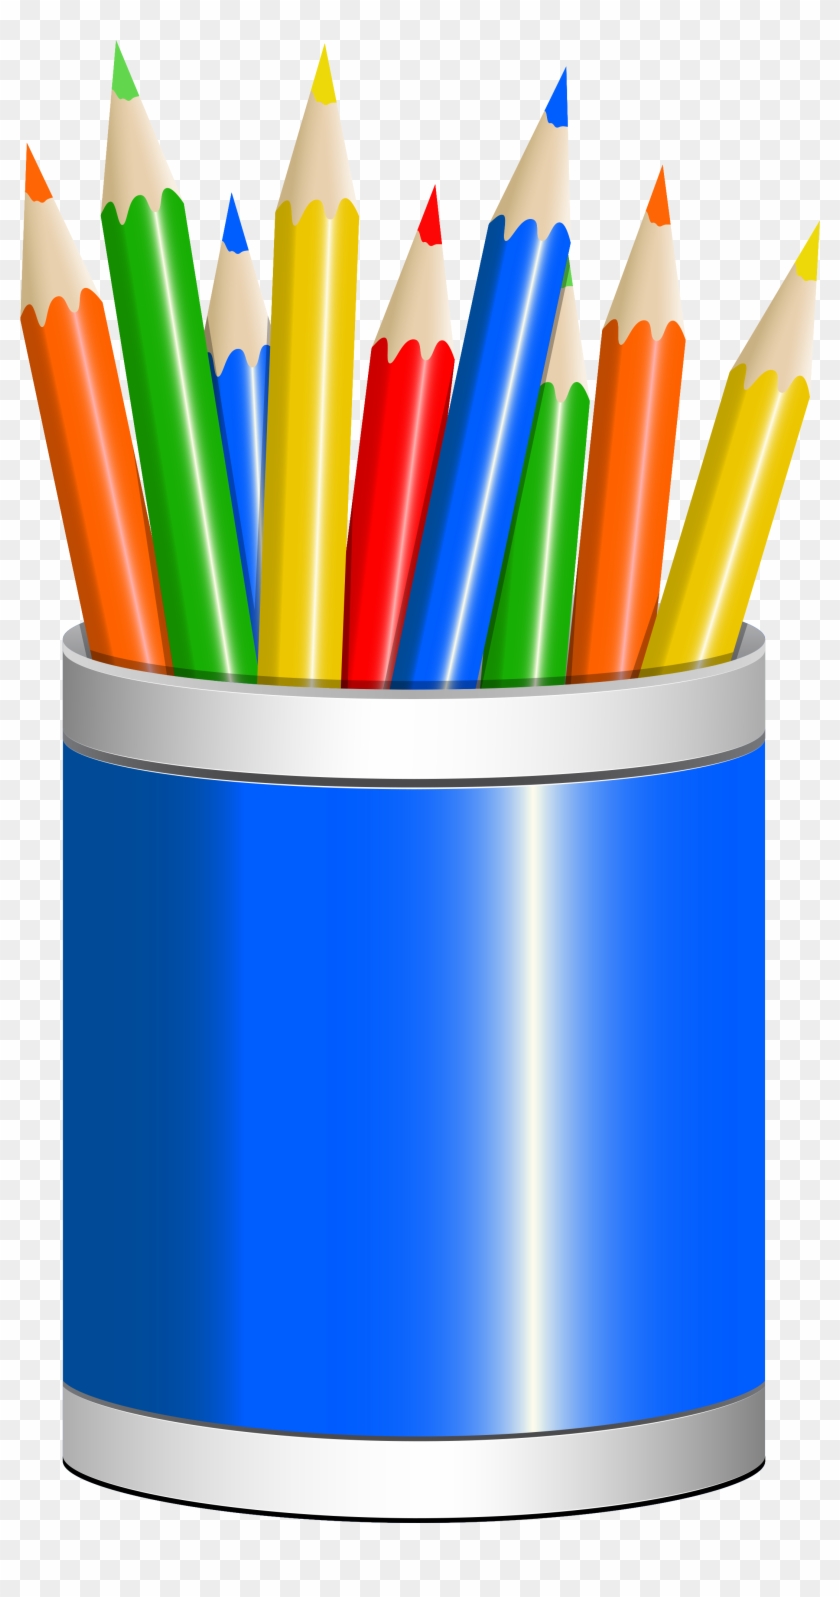 Blue Pencil Cup Png Clipart Image - School Stationary Clipart Free #305591